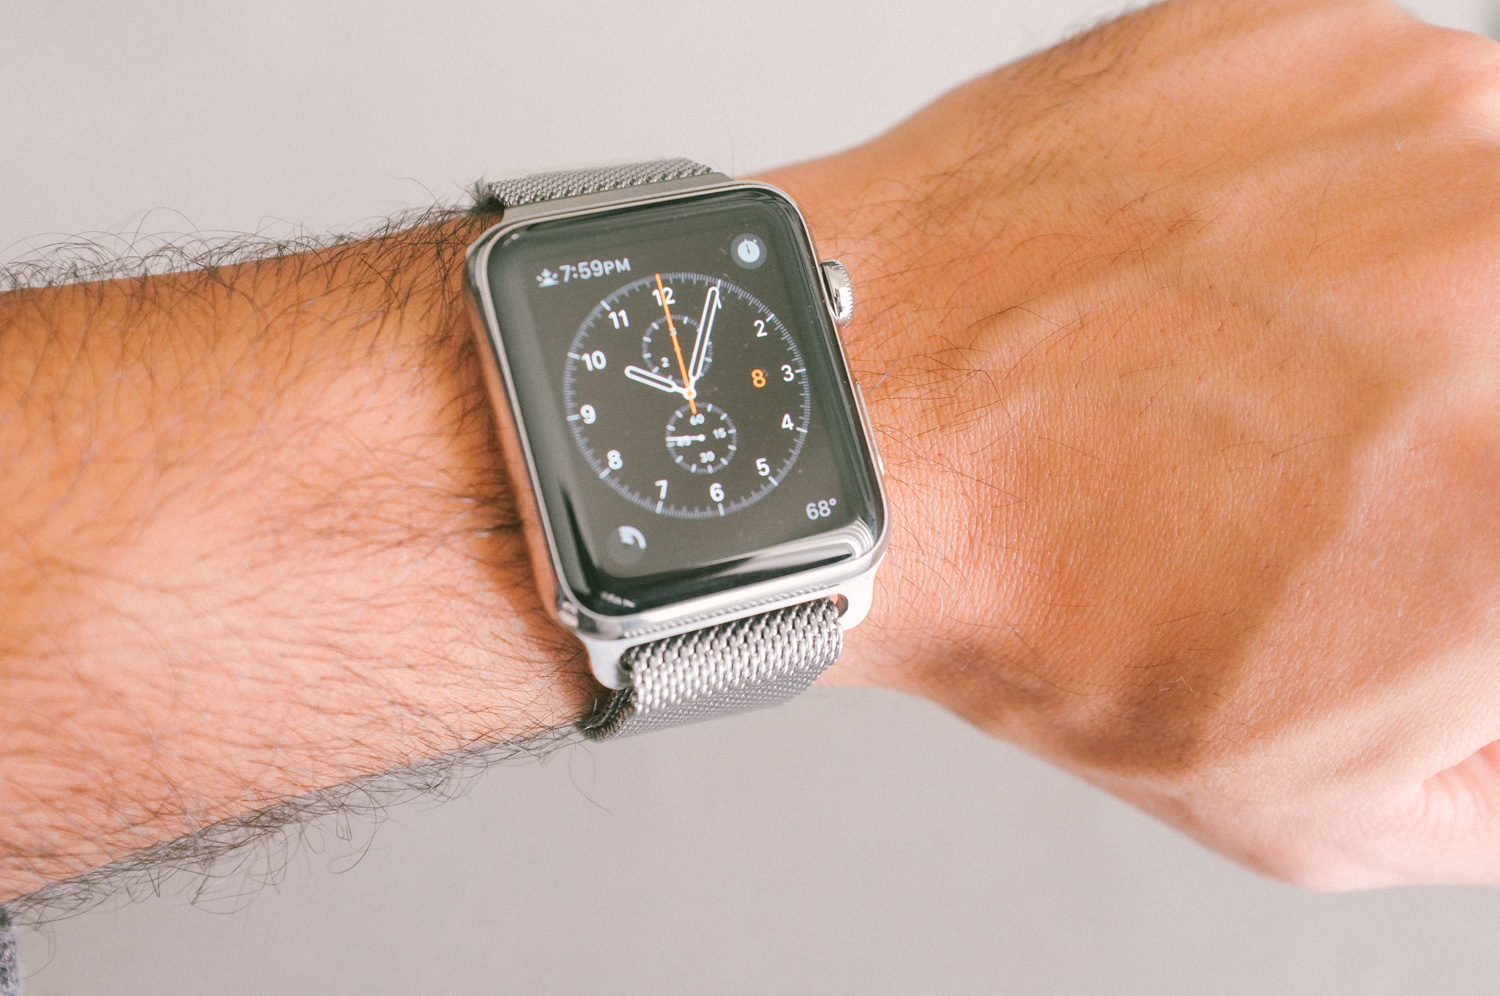 It's too Early to Call the Apple Watch a Flop